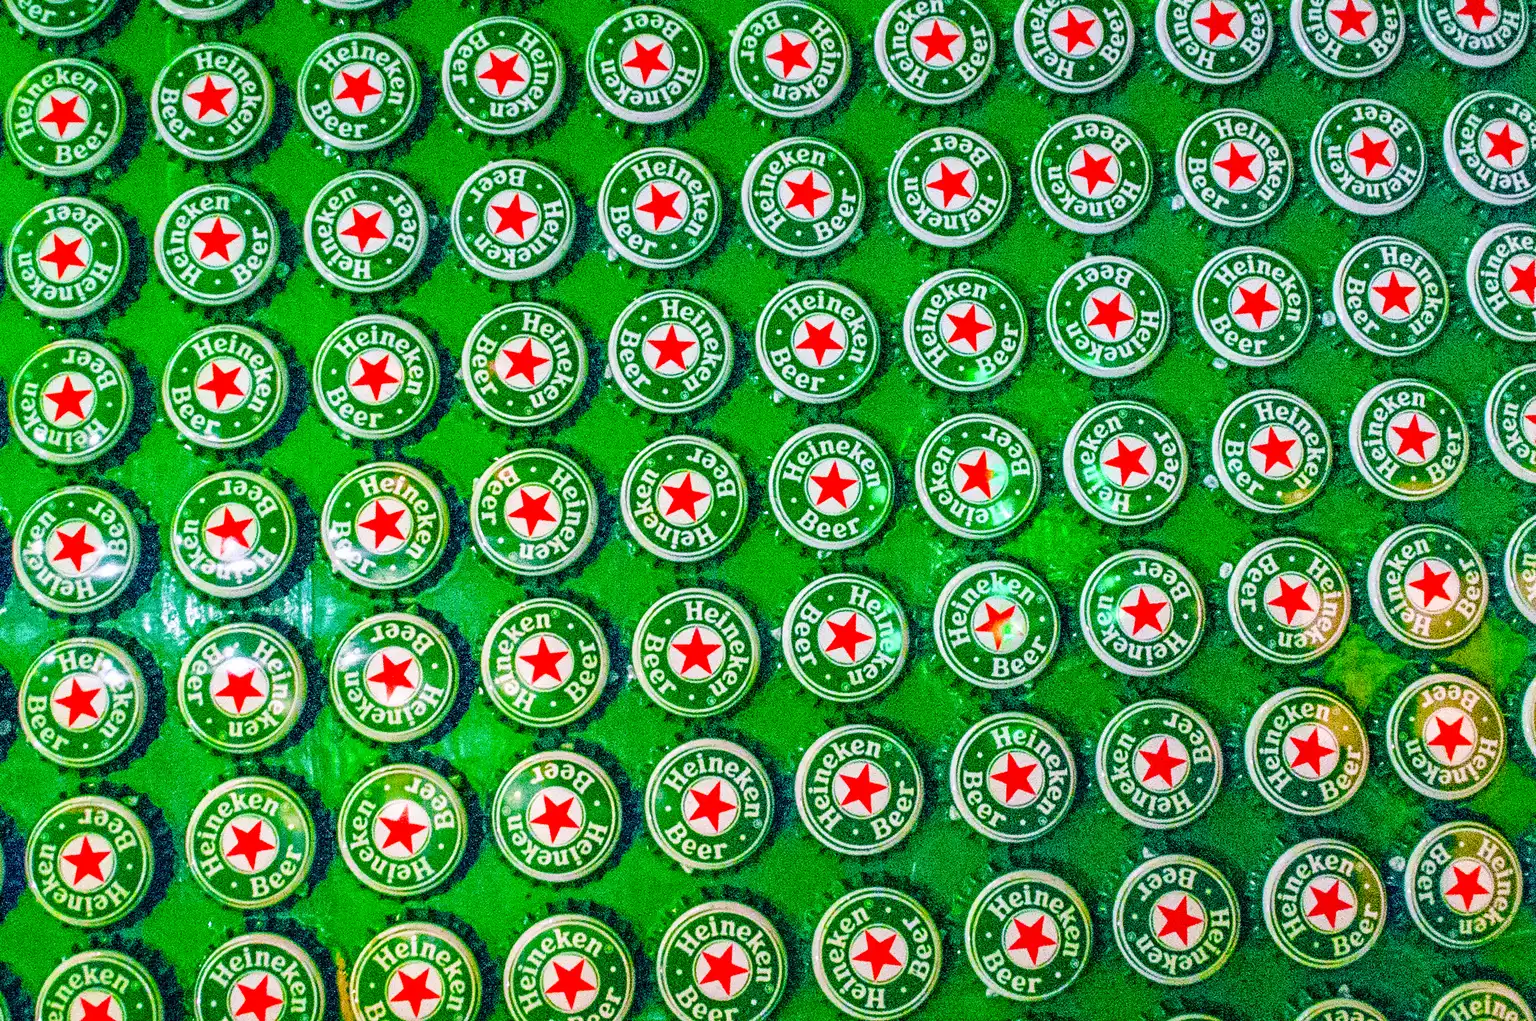 Heineken Q1: Growth And Value Combined Means A Buy - Seeking Alpha